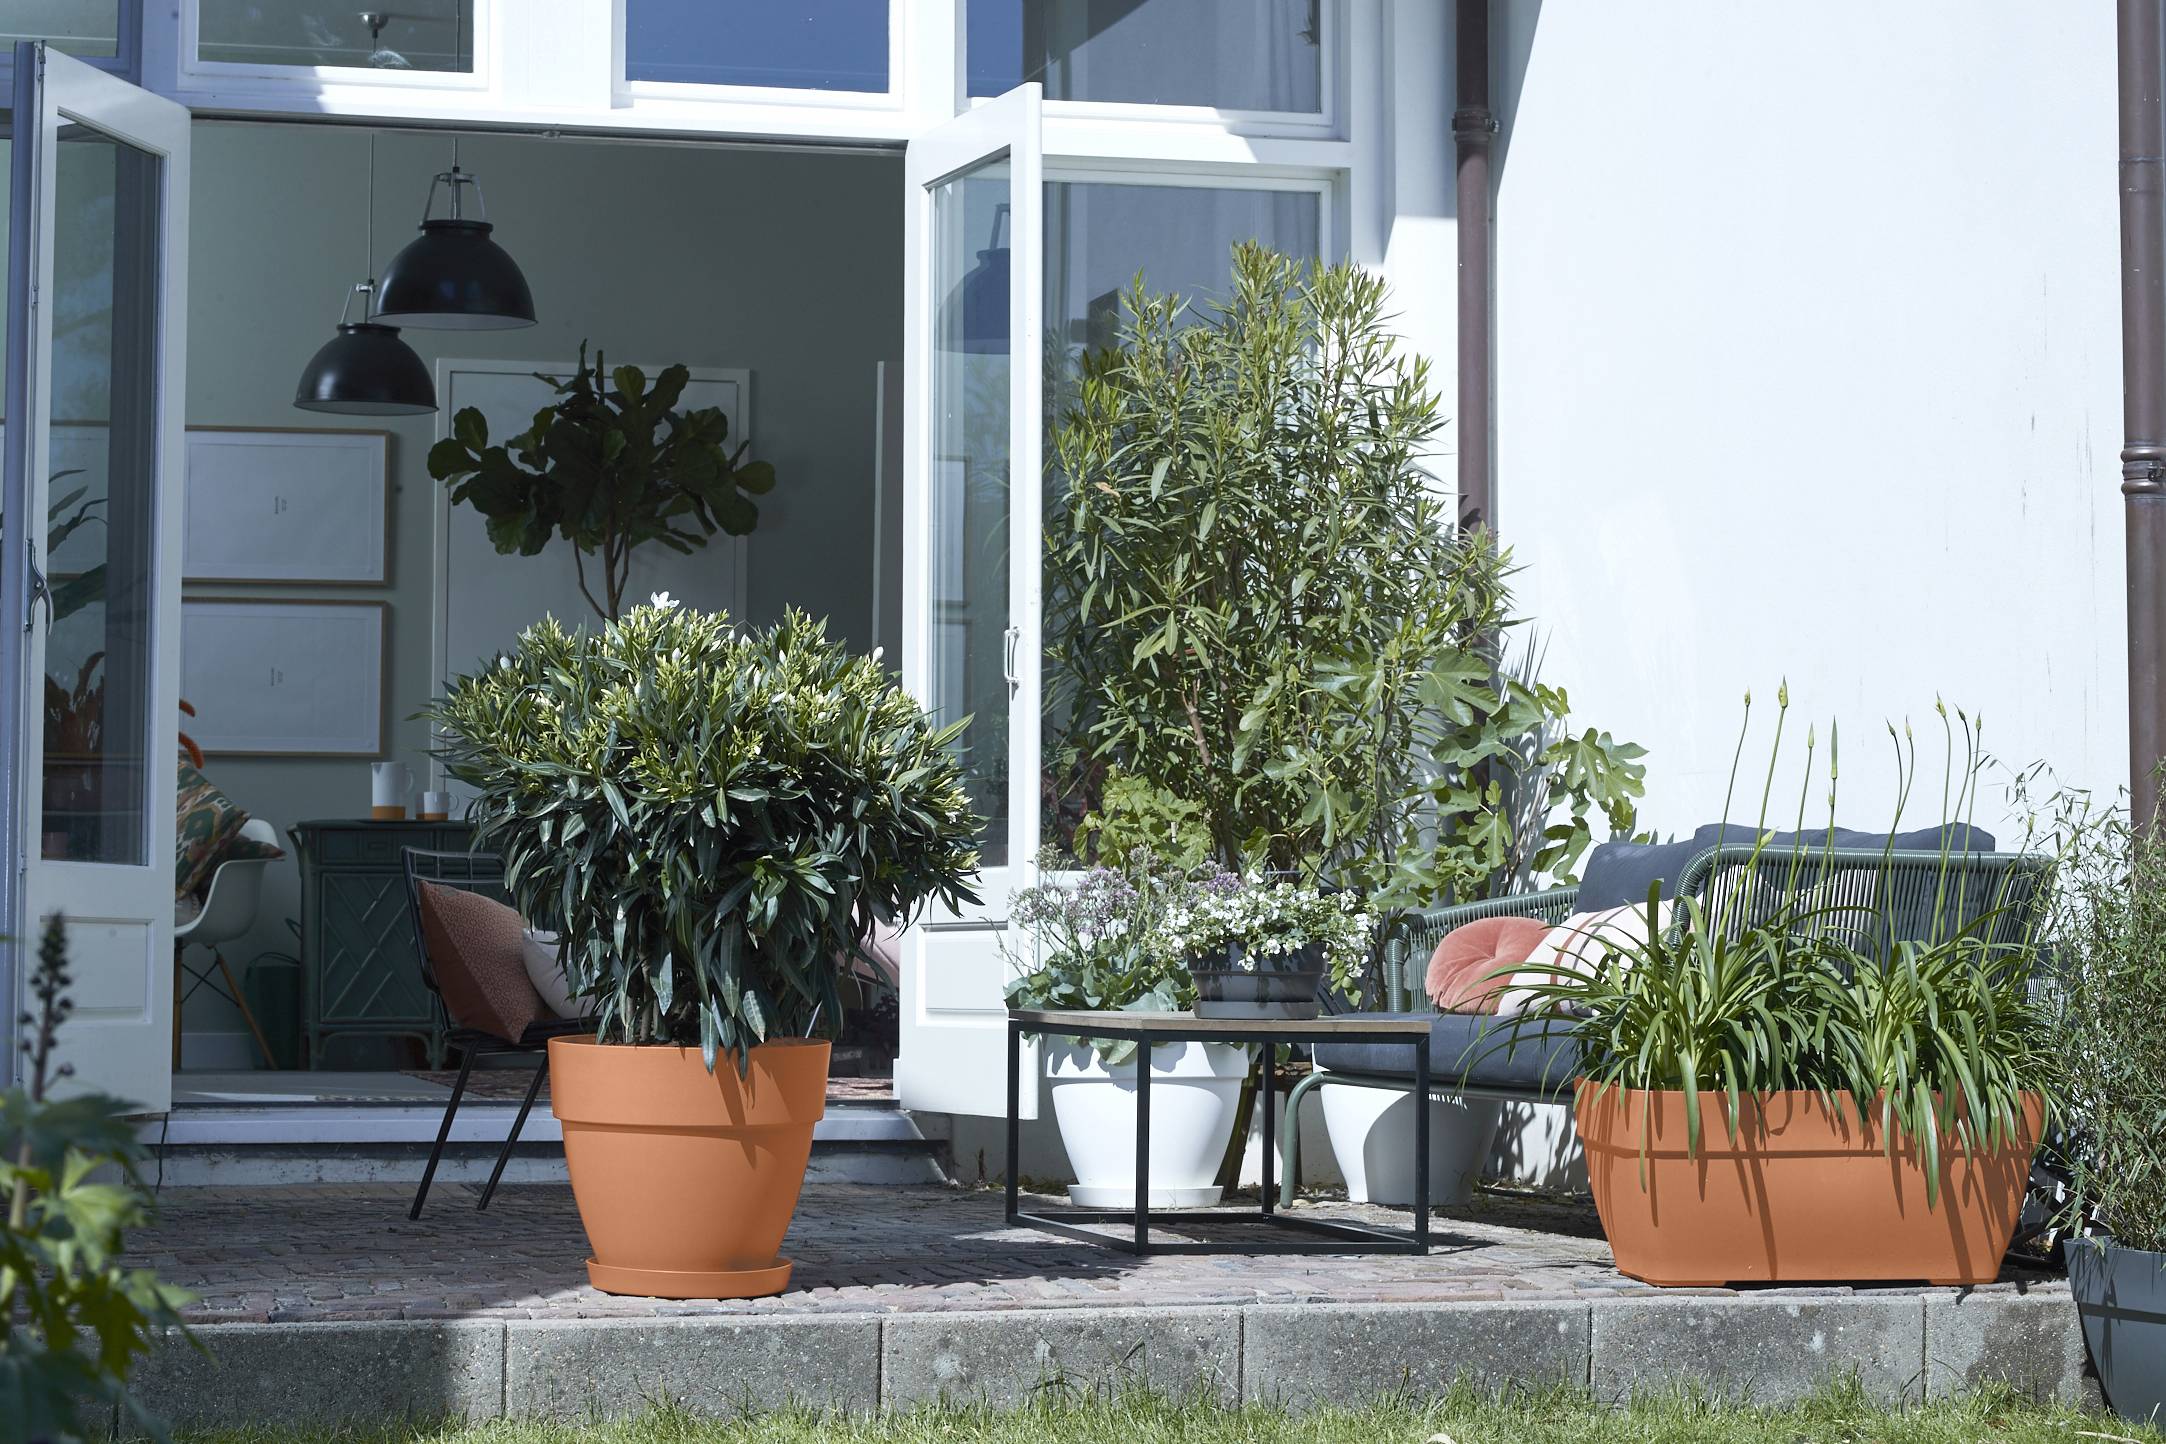 A garden seating area with large Elho planters